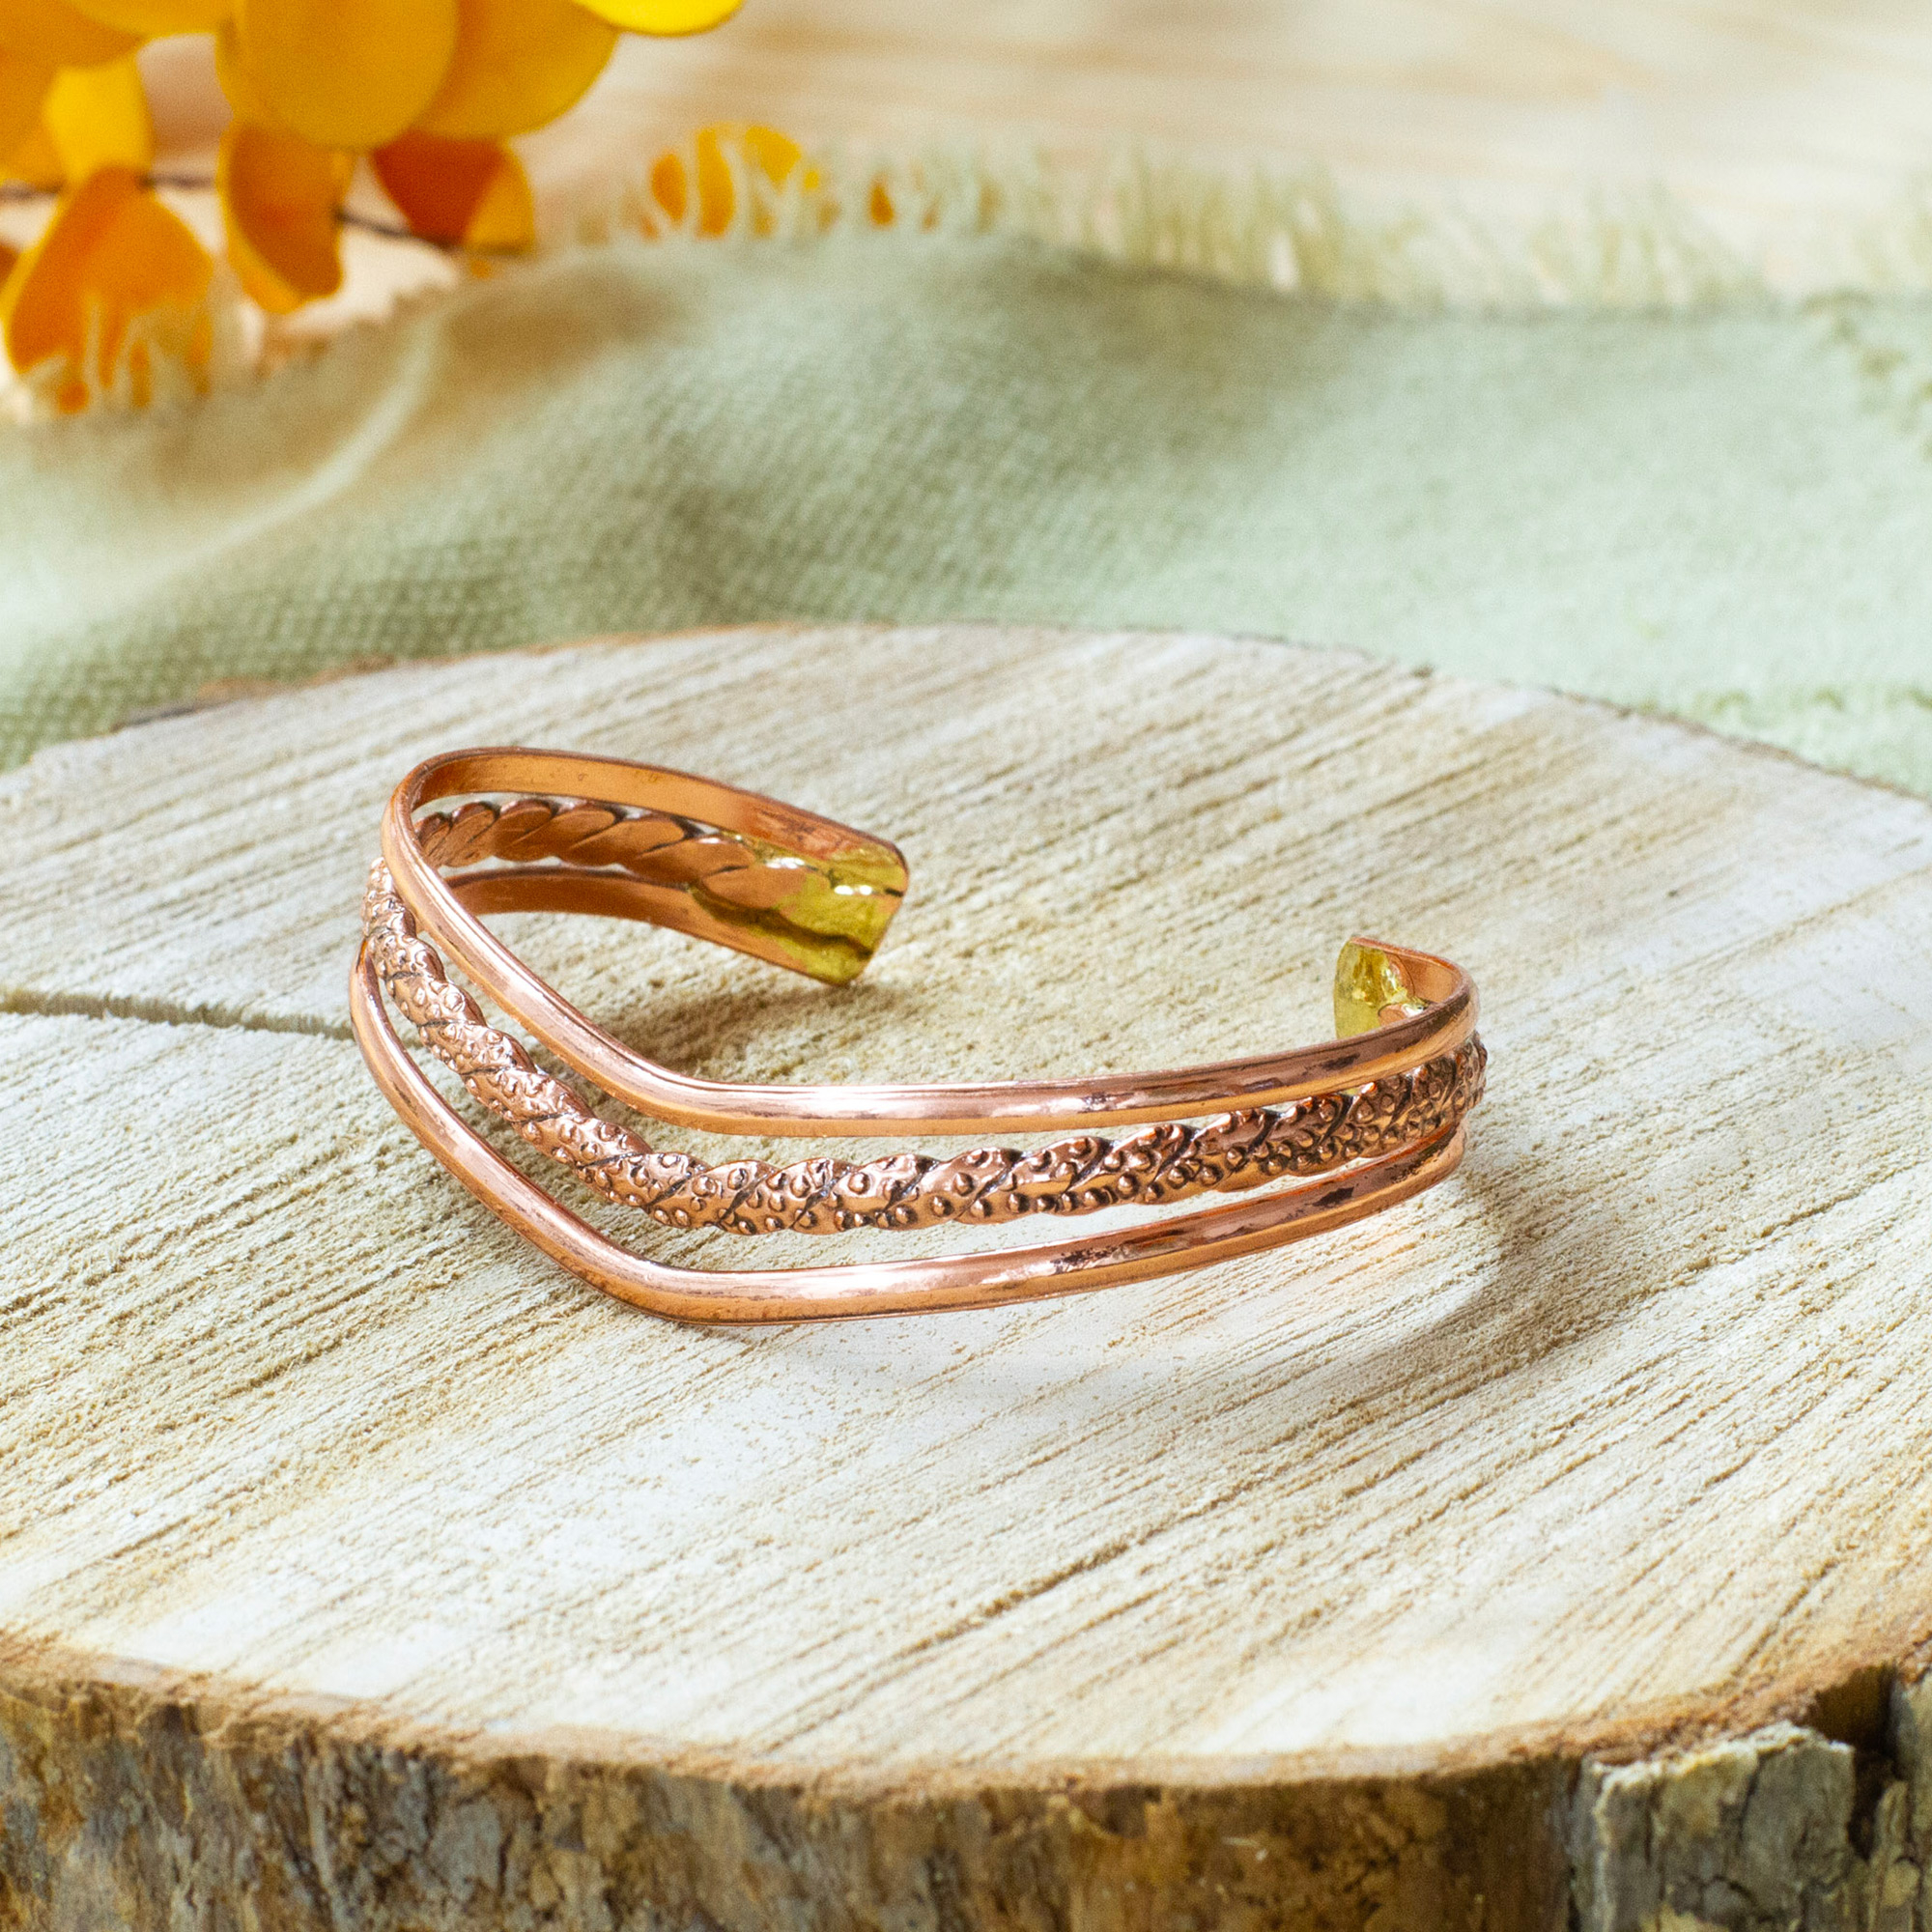 High-Polished Copper Cuff Bracelet Crafted in Mexico, 'Fortunate Deity'